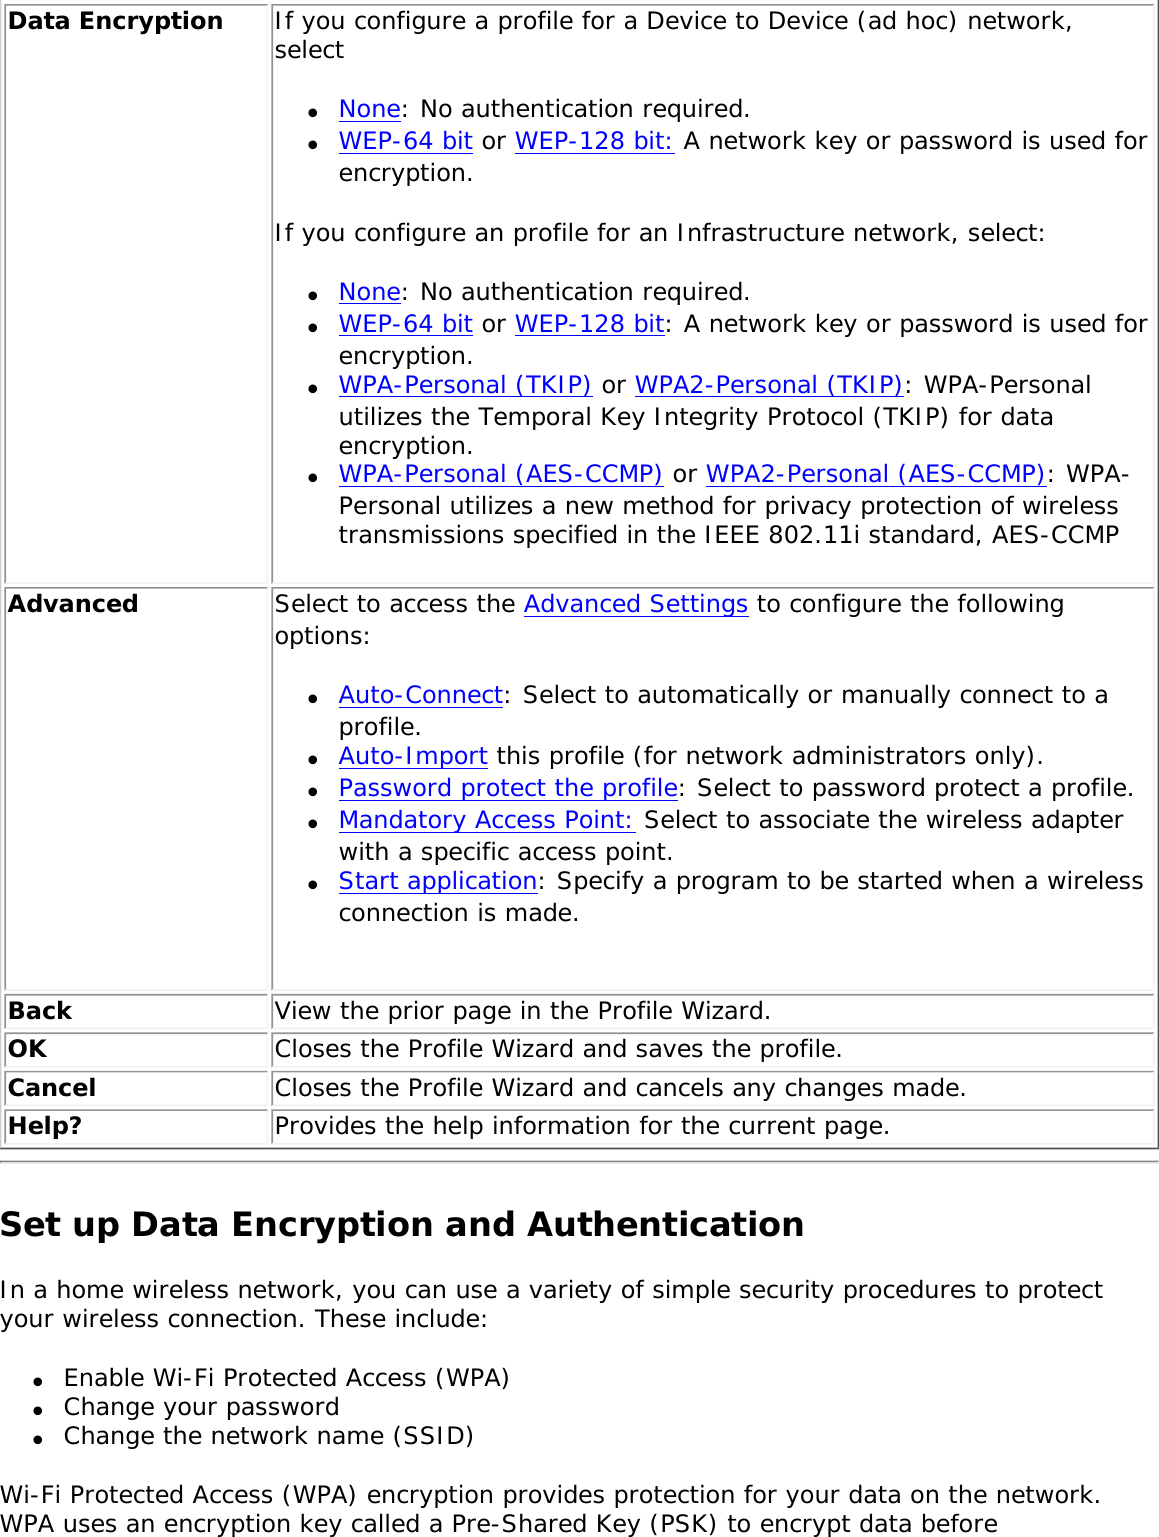 Data Encryption If you configure a profile for a Device to Device (ad hoc) network, select ●     None: No authentication required.●     WEP-64 bit or WEP-128 bit: A network key or password is used for encryption. If you configure an profile for an Infrastructure network, select: ●     None: No authentication required.●     WEP-64 bit or WEP-128 bit: A network key or password is used for encryption. ●     WPA-Personal (TKIP) or WPA2-Personal (TKIP): WPA-Personal utilizes the Temporal Key Integrity Protocol (TKIP) for data encryption. ●     WPA-Personal (AES-CCMP) or WPA2-Personal (AES-CCMP): WPA-Personal utilizes a new method for privacy protection of wireless transmissions specified in the IEEE 802.11i standard, AES-CCMPAdvanced  Select to access the Advanced Settings to configure the following options: ●     Auto-Connect: Select to automatically or manually connect to a profile. ●     Auto-Import this profile (for network administrators only).●     Password protect the profile: Select to password protect a profile. ●     Mandatory Access Point: Select to associate the wireless adapter with a specific access point.●     Start application: Specify a program to be started when a wireless connection is made.   Back  View the prior page in the Profile Wizard.OK  Closes the Profile Wizard and saves the profile.Cancel  Closes the Profile Wizard and cancels any changes made.Help? Provides the help information for the current page.Set up Data Encryption and AuthenticationIn a home wireless network, you can use a variety of simple security procedures to protect your wireless connection. These include: ●     Enable Wi-Fi Protected Access (WPA)●     Change your password●     Change the network name (SSID)Wi-Fi Protected Access (WPA) encryption provides protection for your data on the network. WPA uses an encryption key called a Pre-Shared Key (PSK) to encrypt data before 